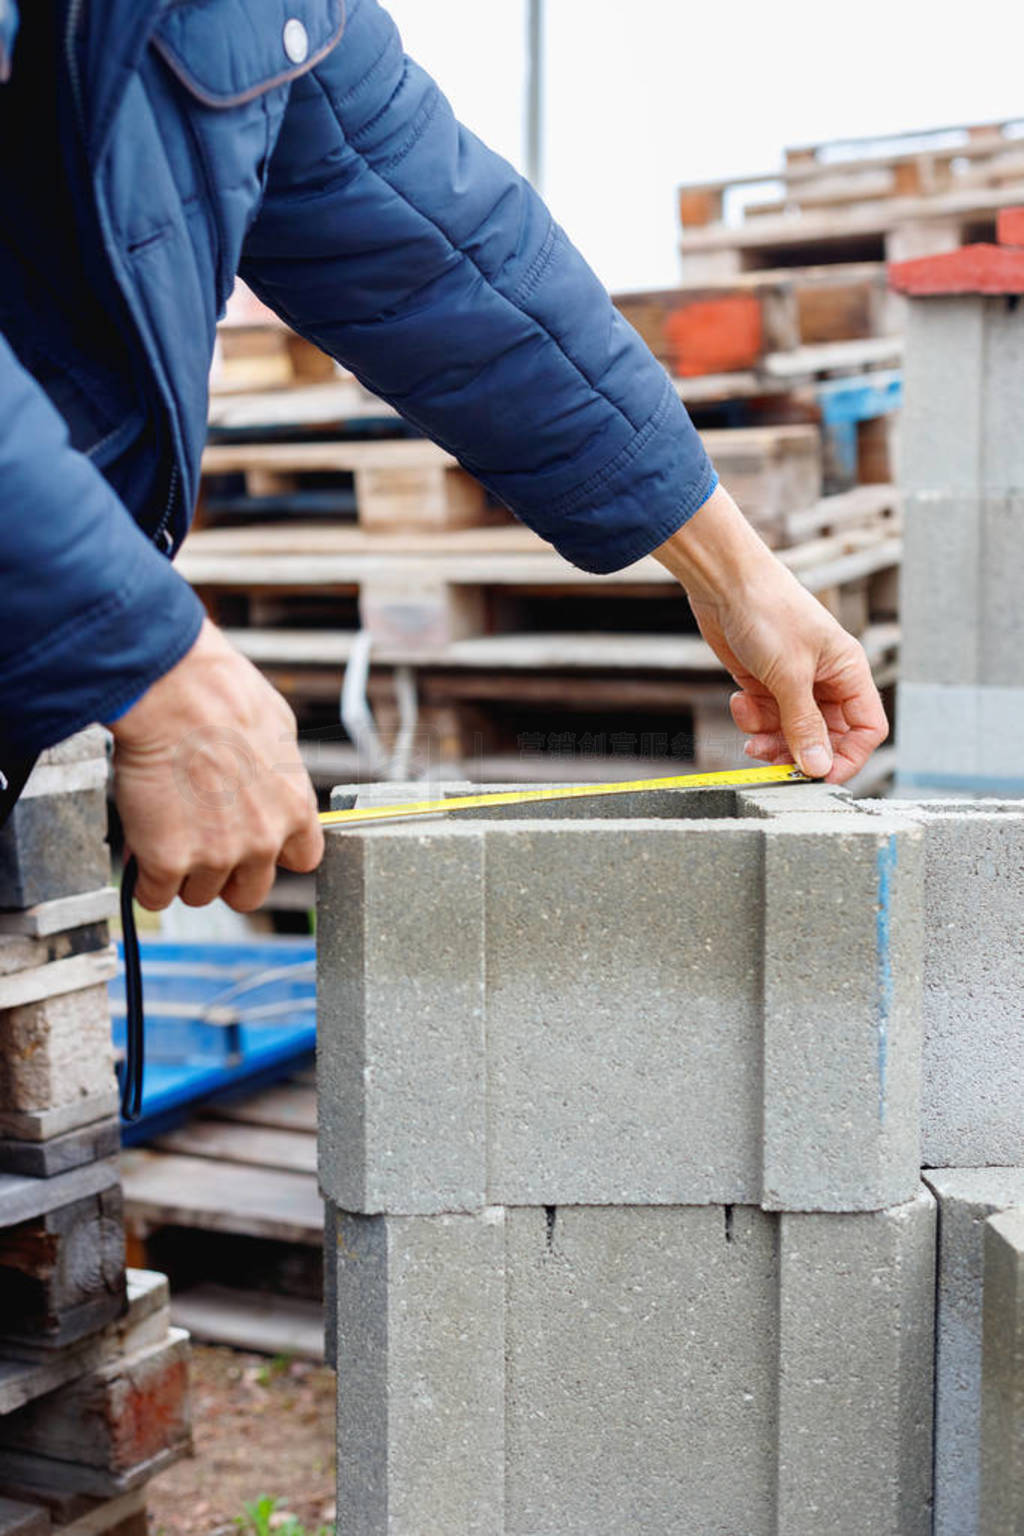 Worker measures cement building blocks on the warehouse